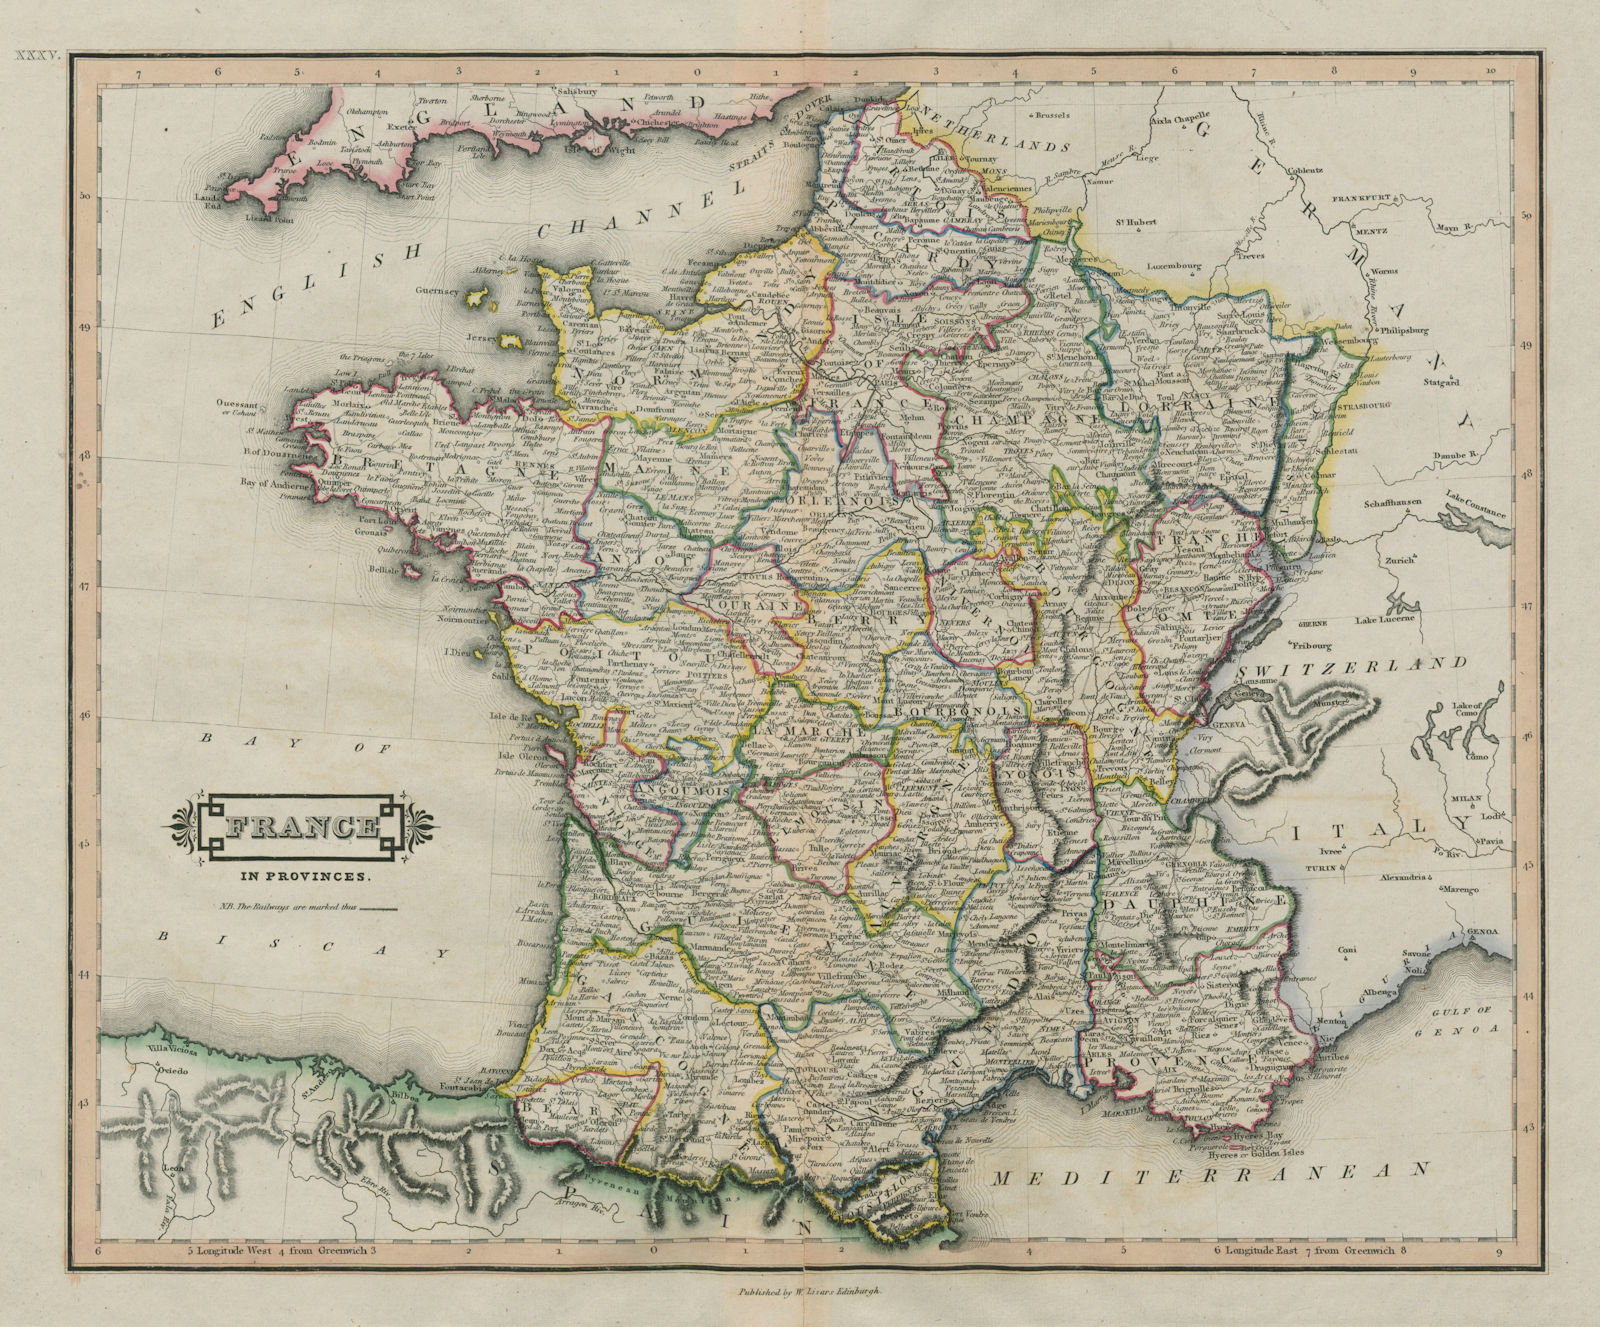 France in provinces. Pre-Revolutionary France. LIZARS 1842 old antique map